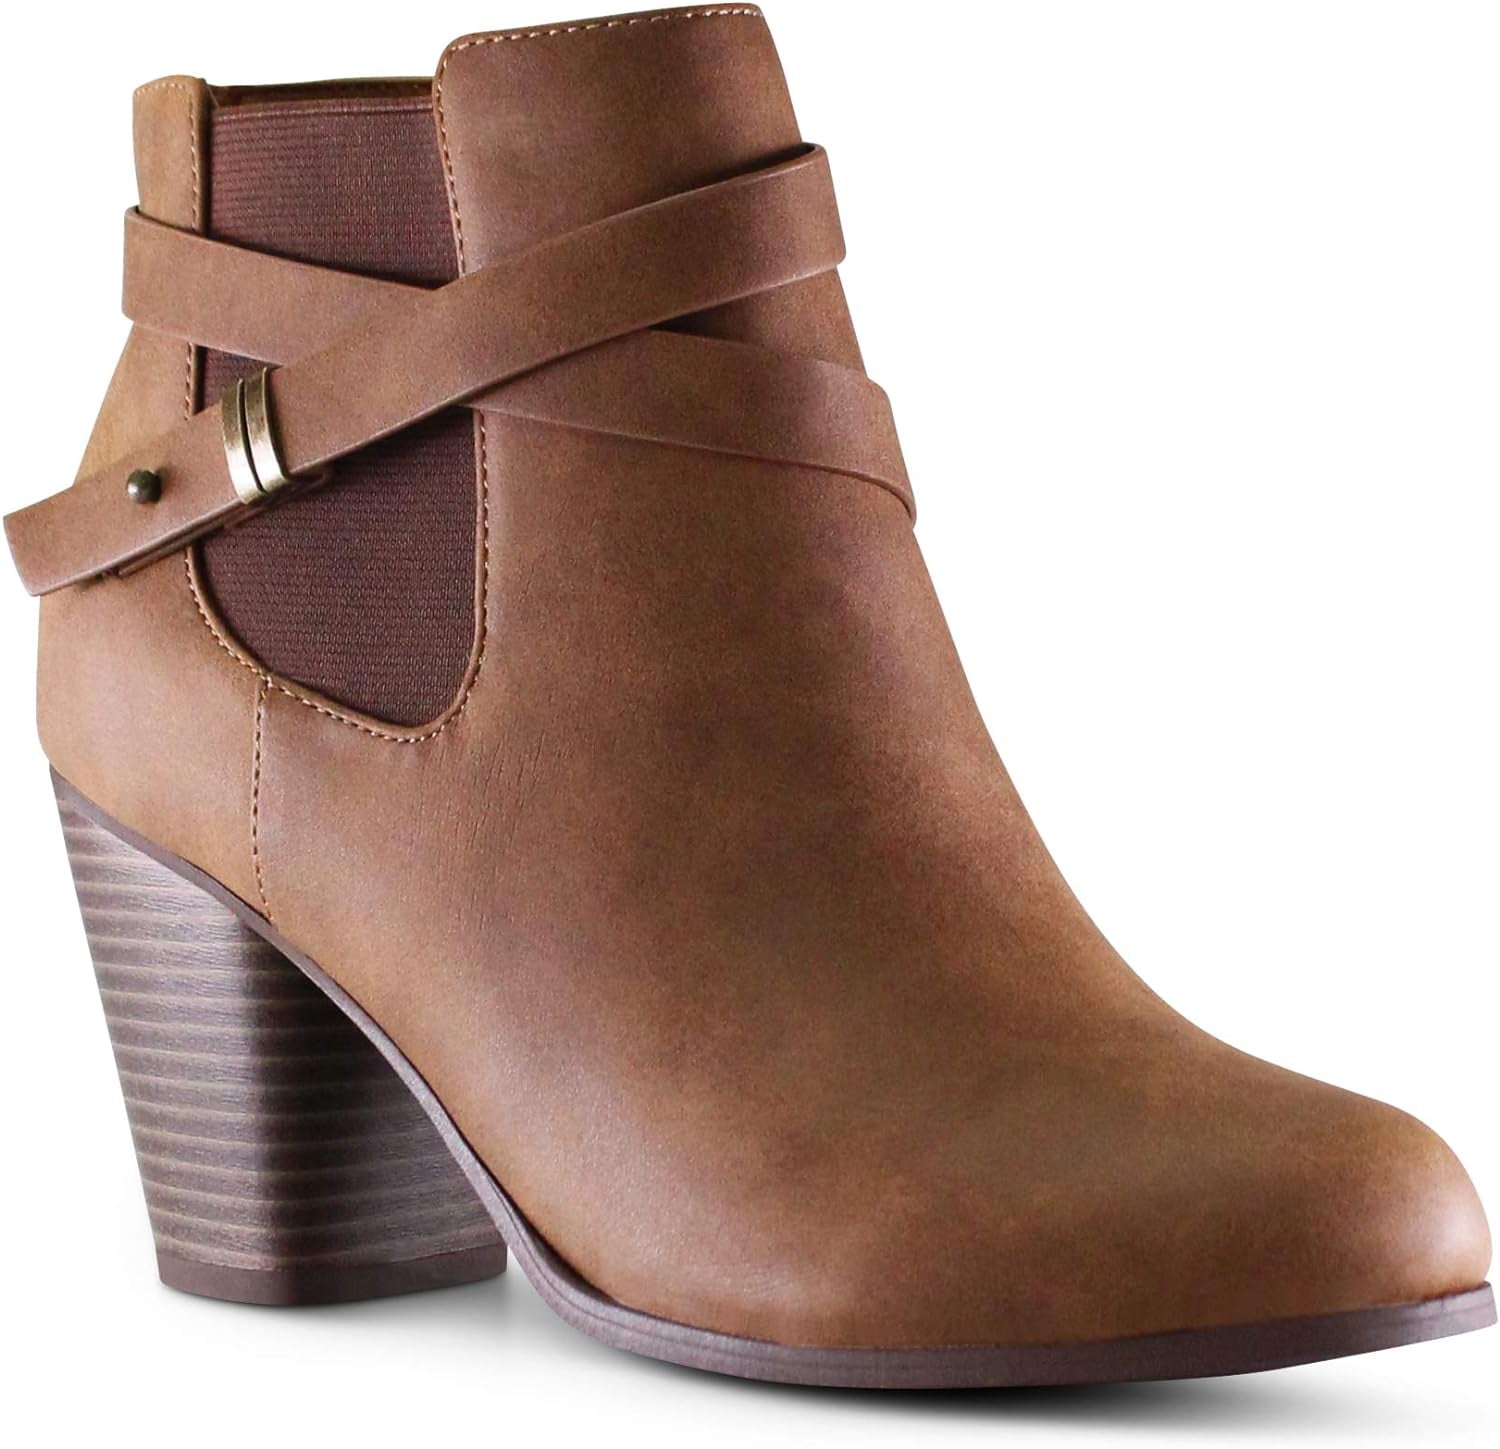 Marco Republic Montreal Women'S Almond Toe High Chunky Block Stacked Heels Ankle Booties Boots